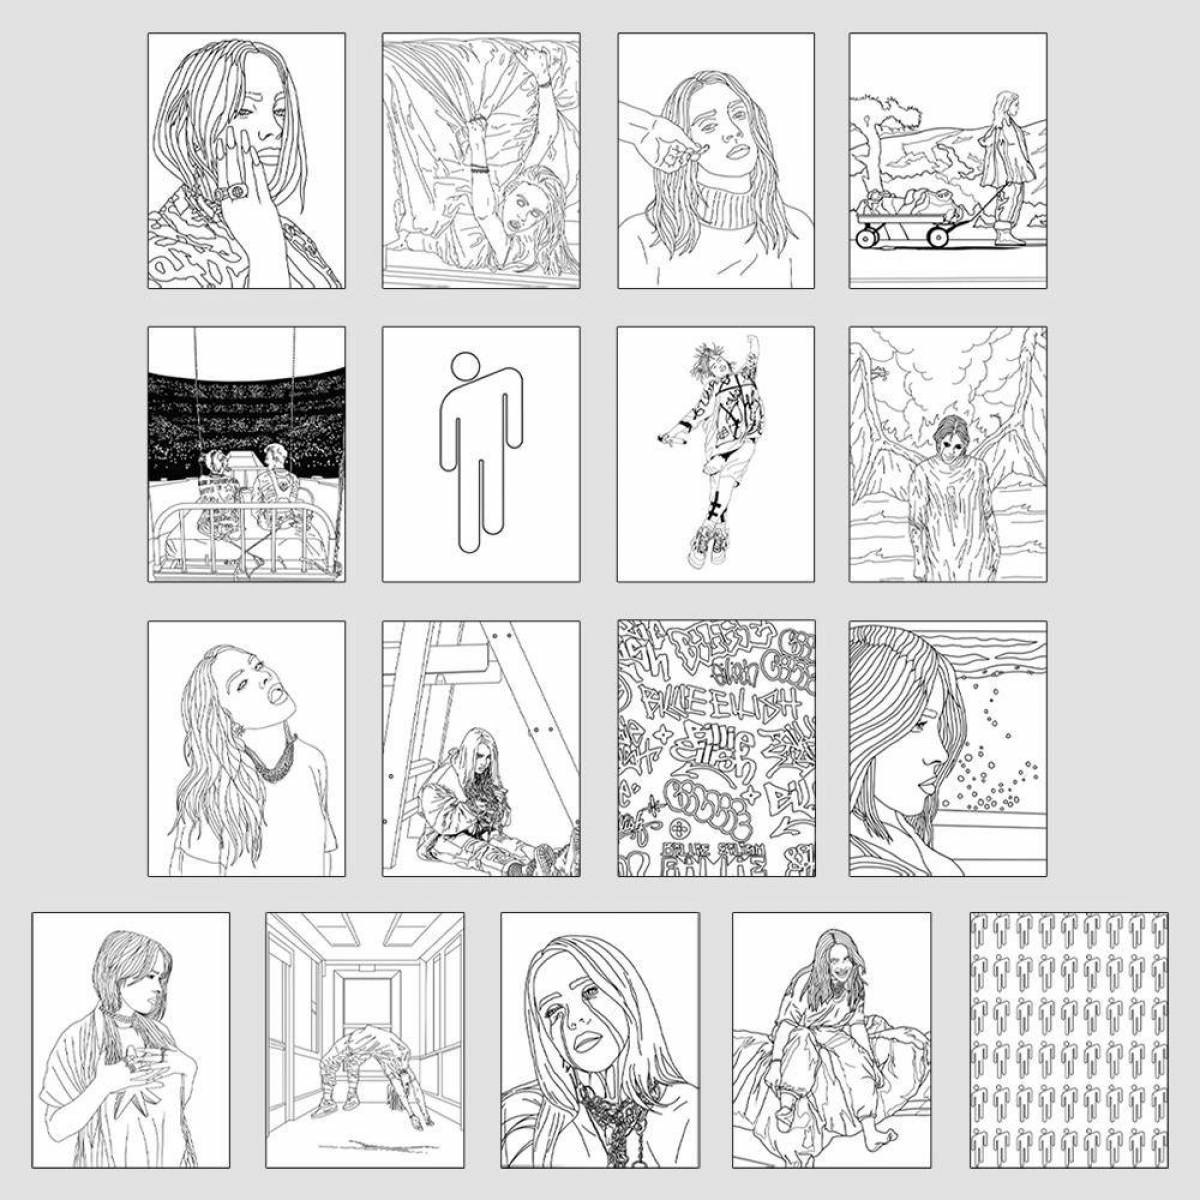 Billie Eilish's funny coloring book